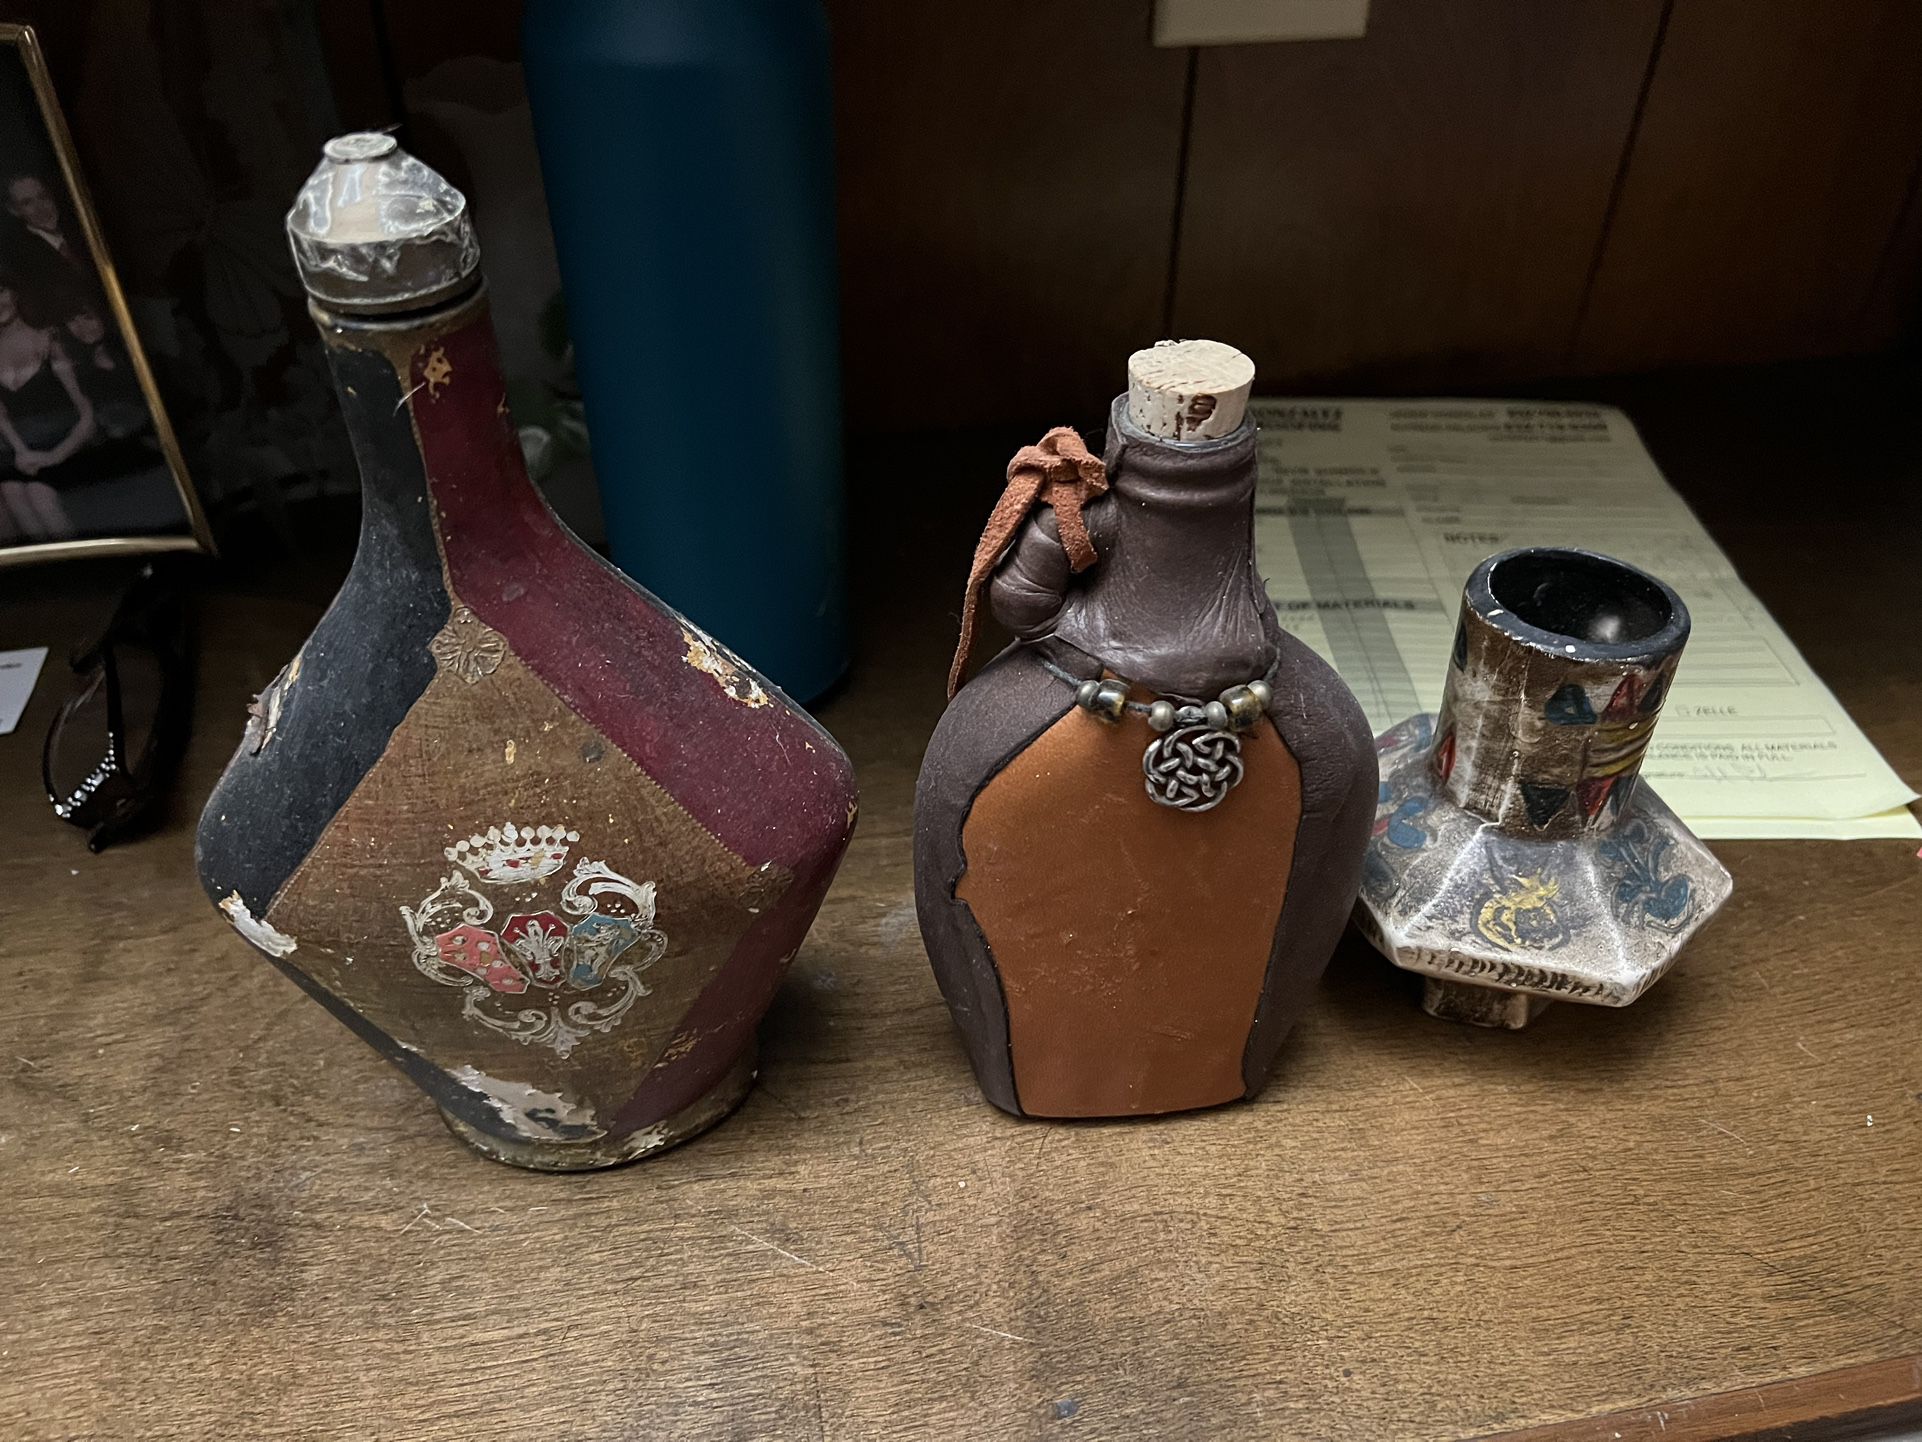 $80 OBO. Southwest Authentic Vintage Hand-Sculpted Assorted Bottles, Clay Pottery. Price is for entire lot